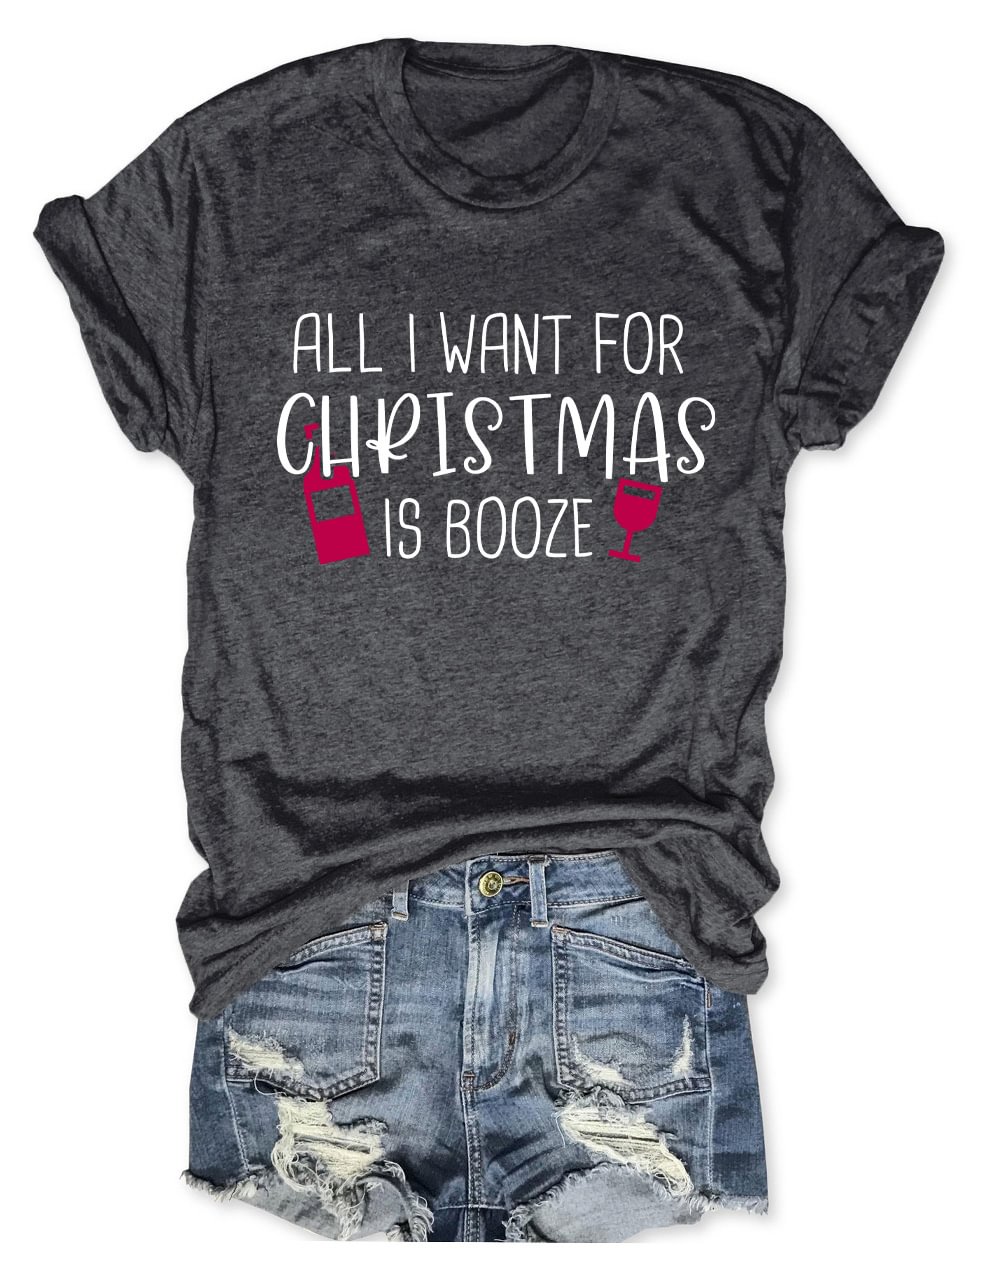 All I Want For Christmas Is Booze T-Shirt